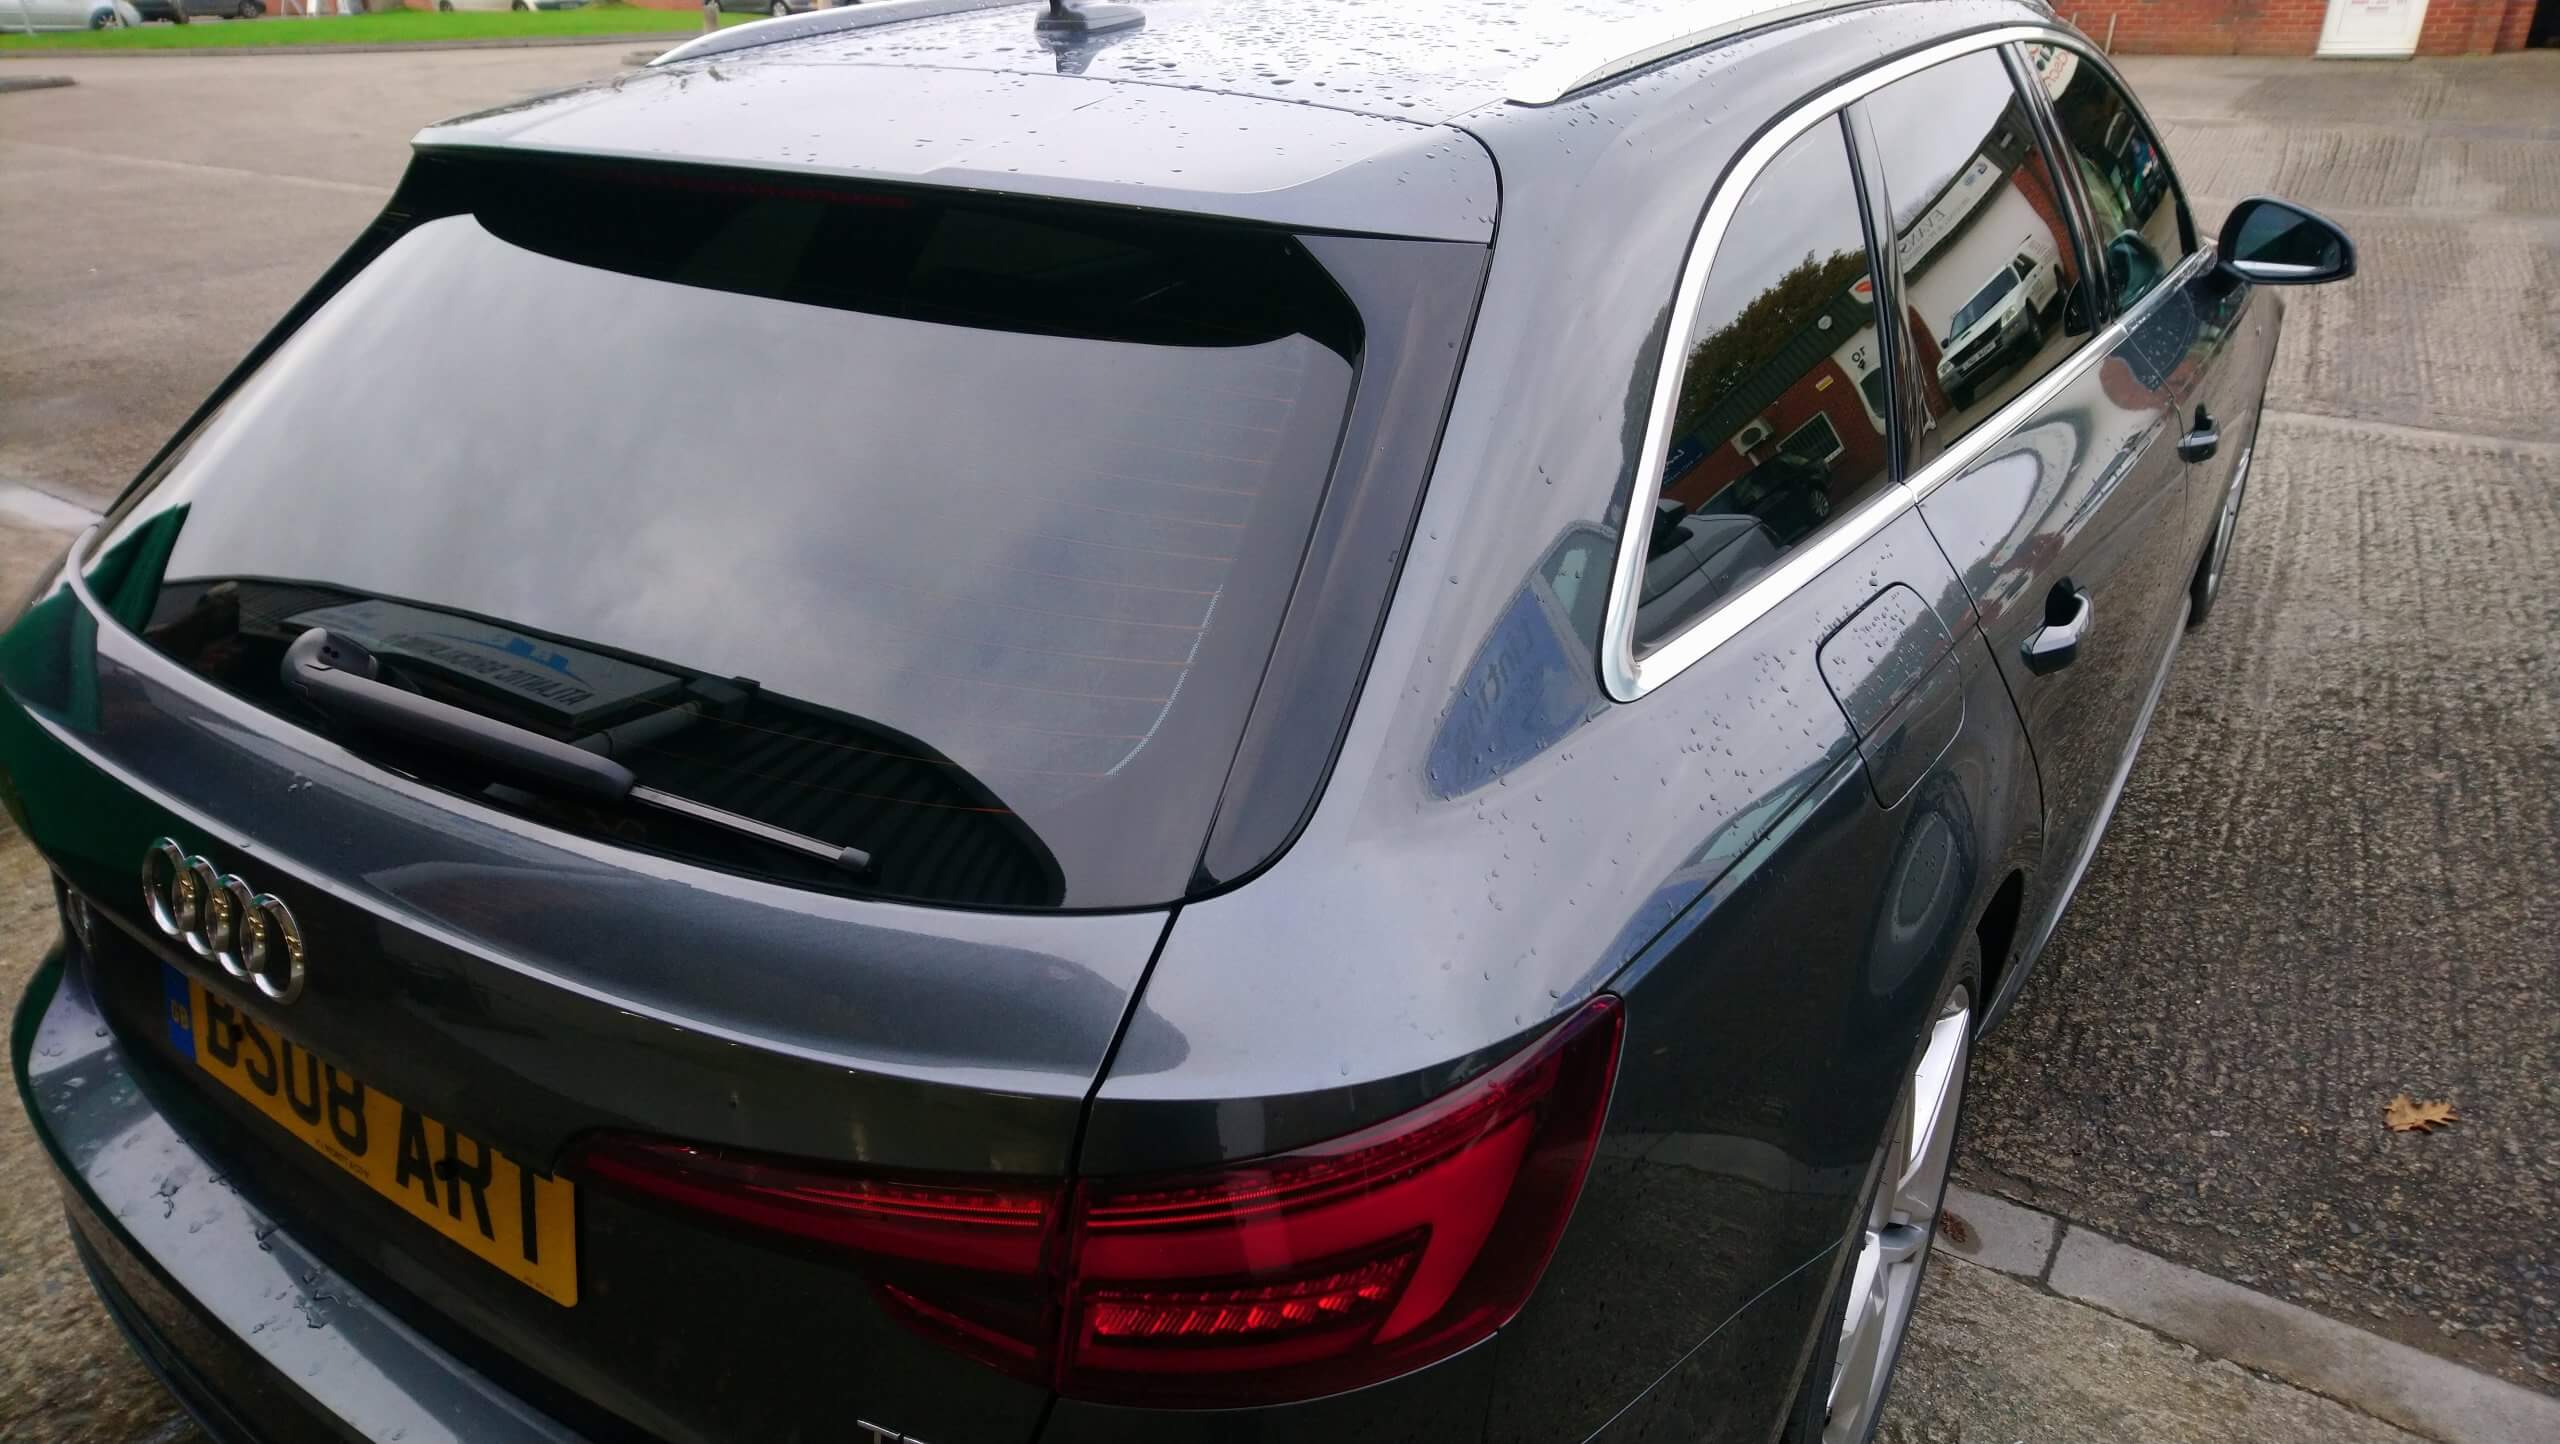 Audi A4 Avant window tinting with our high heat rejecting window film - 18 grade. Fitted by Tinting Express Barnstaple